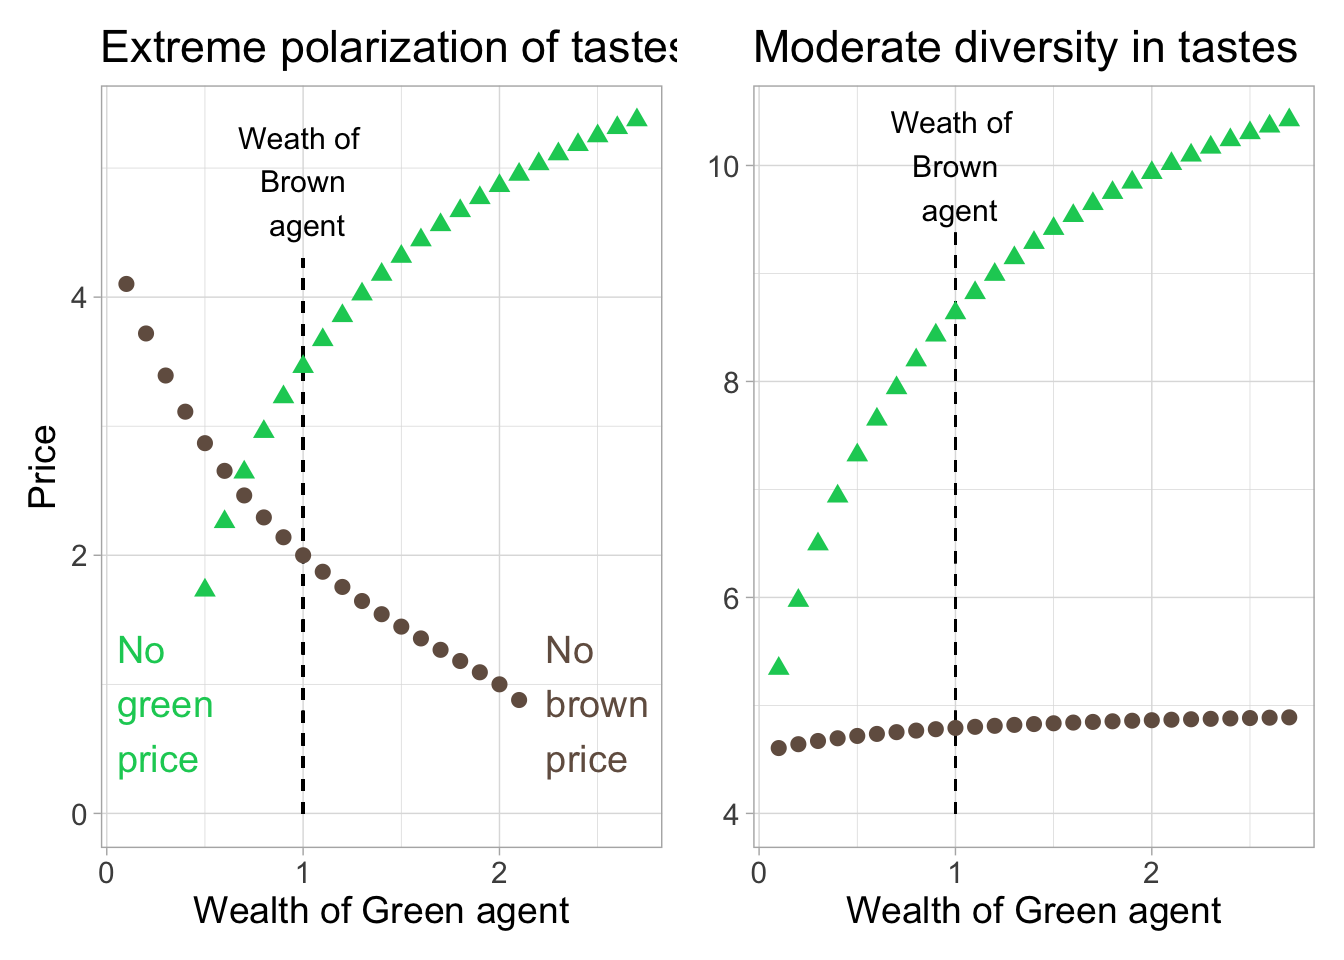 Theoretical predictions. We plot the price of two assets as a function of the wealth of the Green investor (the wealth of the Brown investor is kept constant at unit value). Prices for the green asset (e=1) are shown with triangles, while those for the brown asset (e=0) are shown with circles. For some values of the x-axis, prices may not be defined in the left plot.